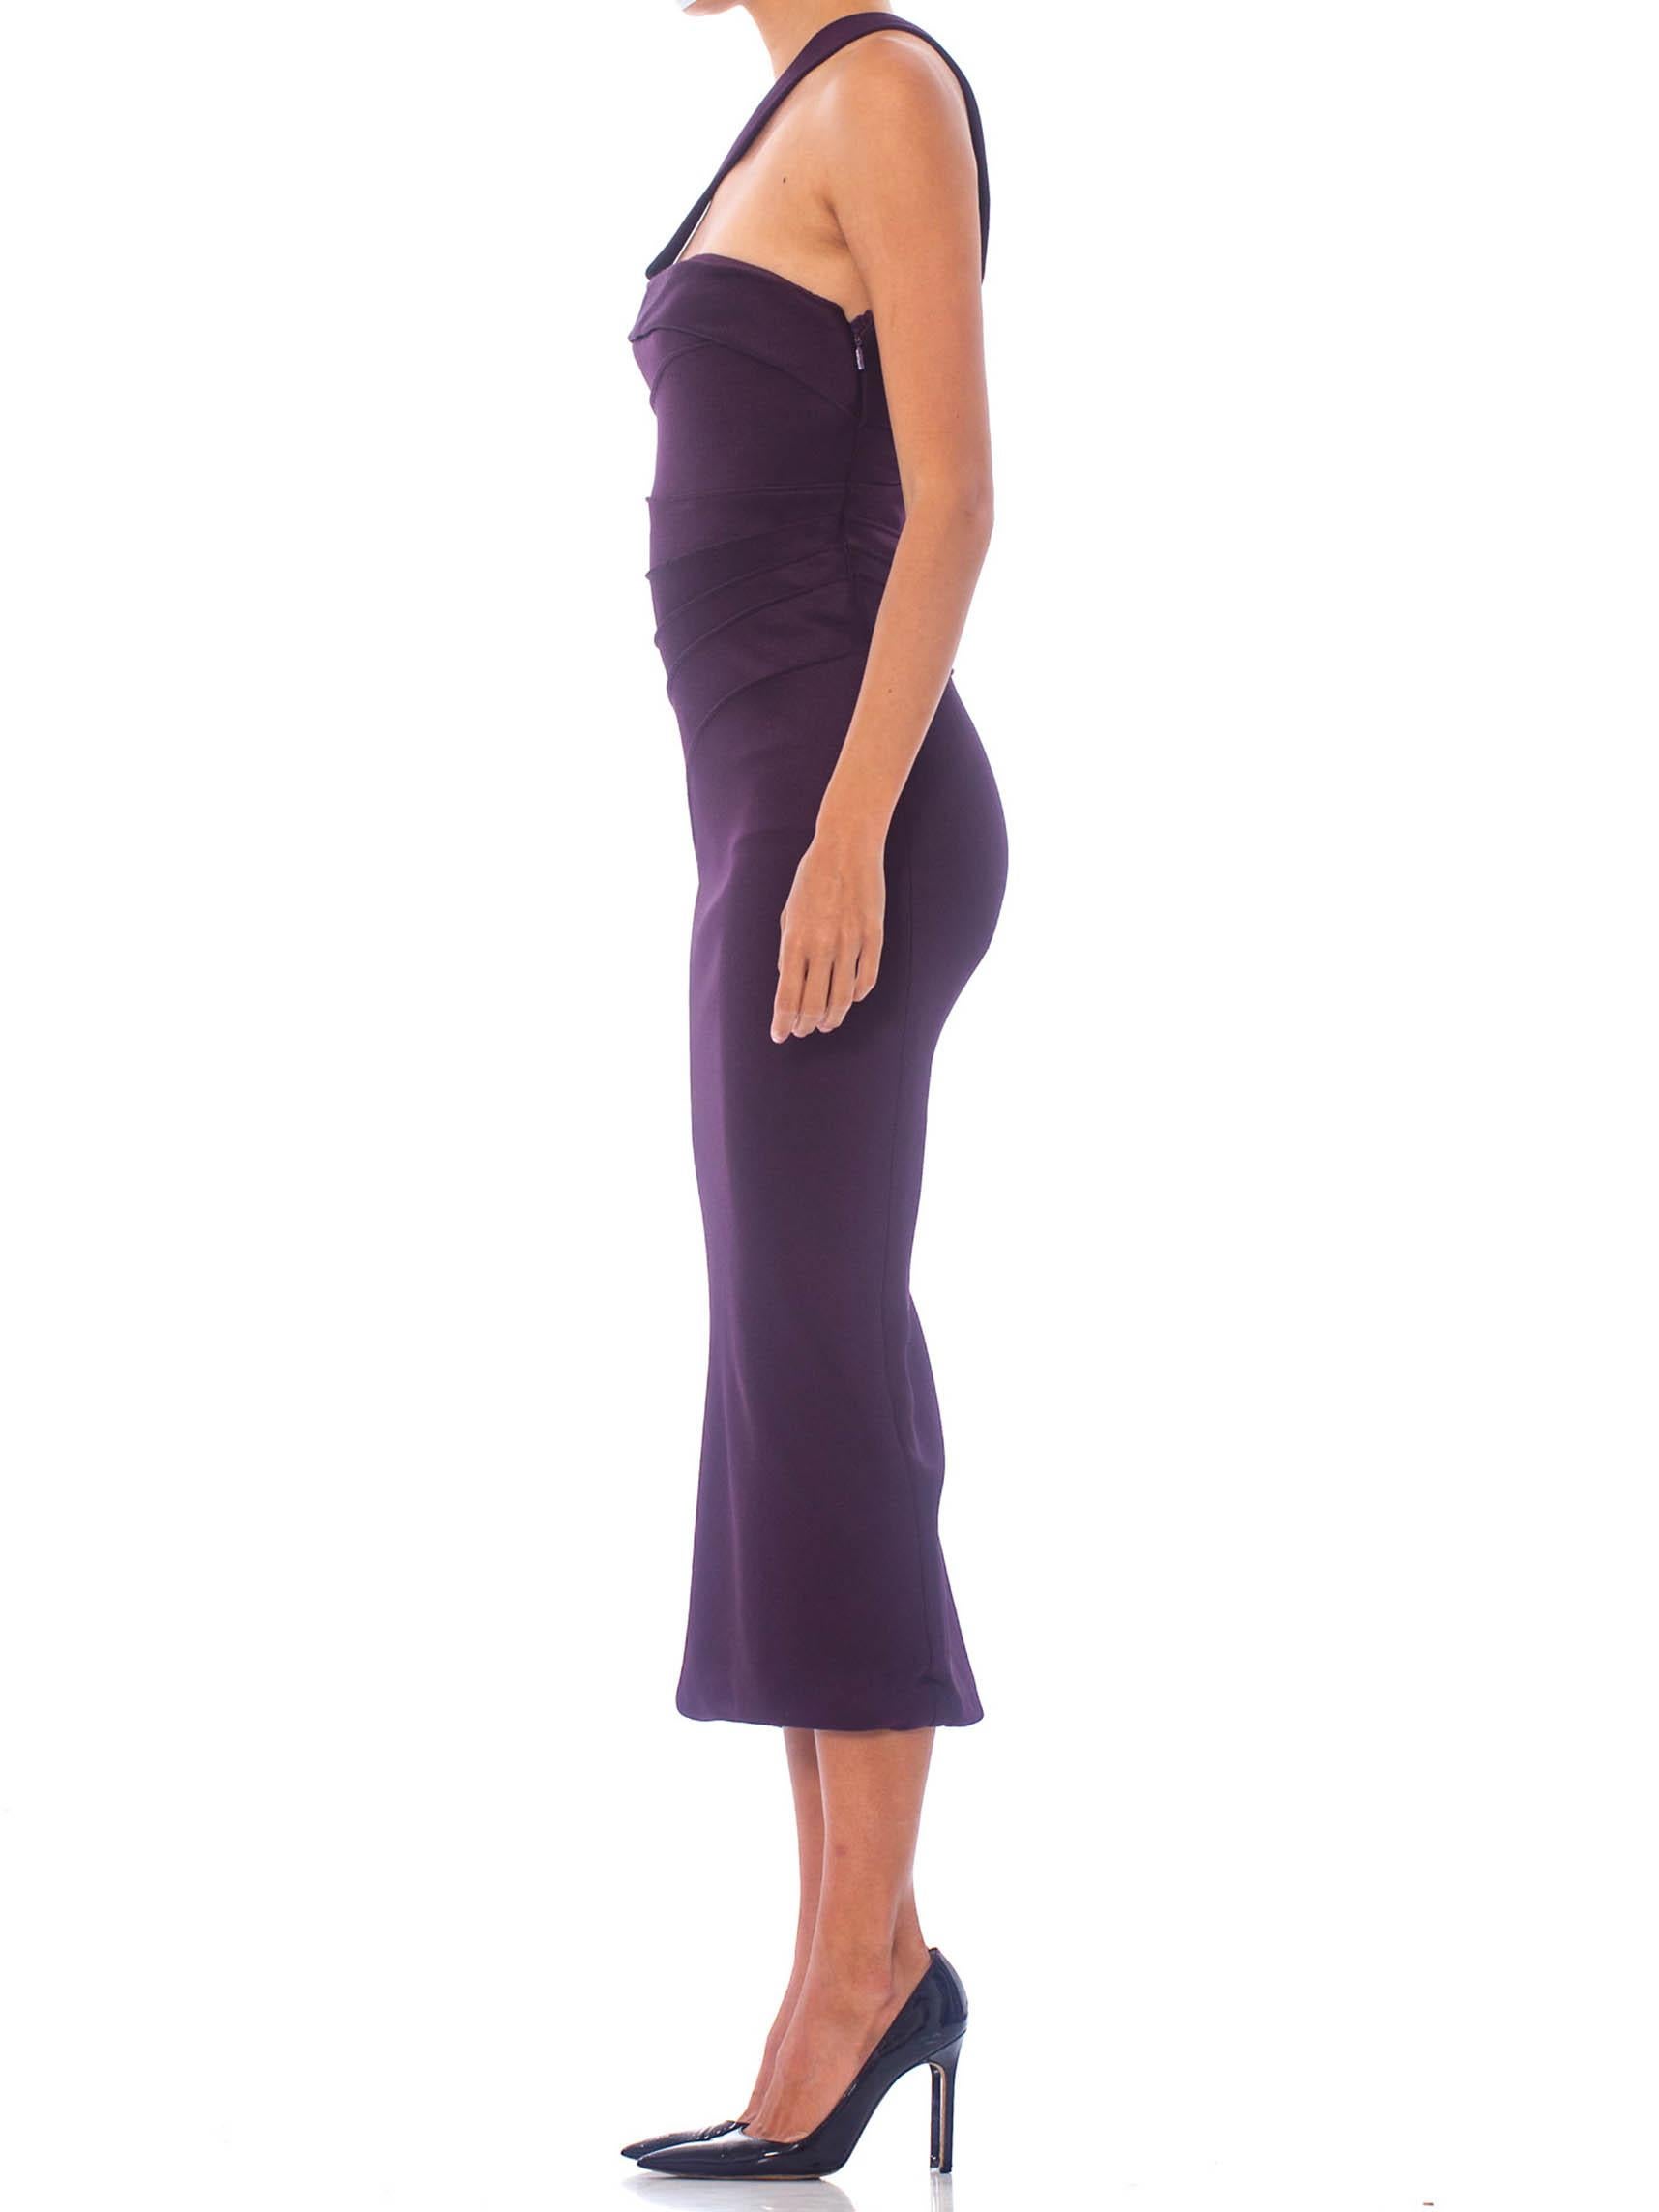 2000S DONATELLA VERSACE Eggplant Rayon Blend Jersey One Shoulder Strapless Sexy For Sale 1